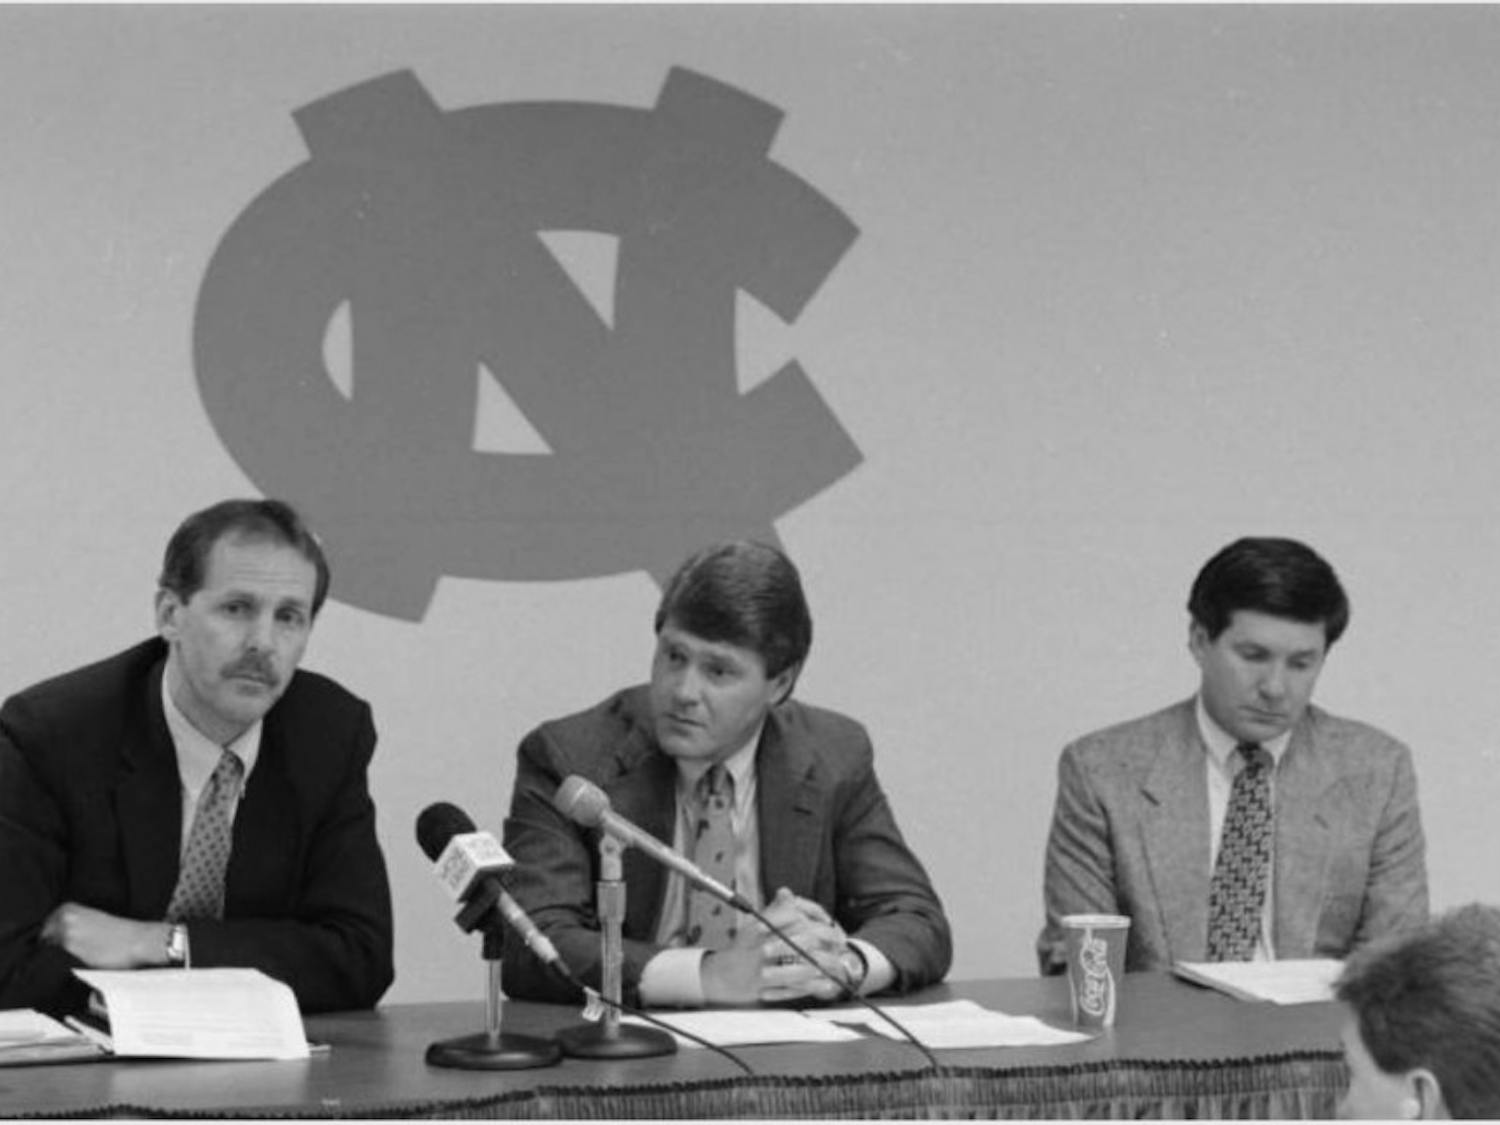 Press Conference, WCHL 1360. (Left to right): Unidentified man, UNC Athletic Director John Swofford, UNC Head Football Coach Mack Brown. In the Hugh Morton Photographs and Films #P0081, copyright, 1988-1994, North Carolina Collection, University of North Carolina at Chapel Hill Library.